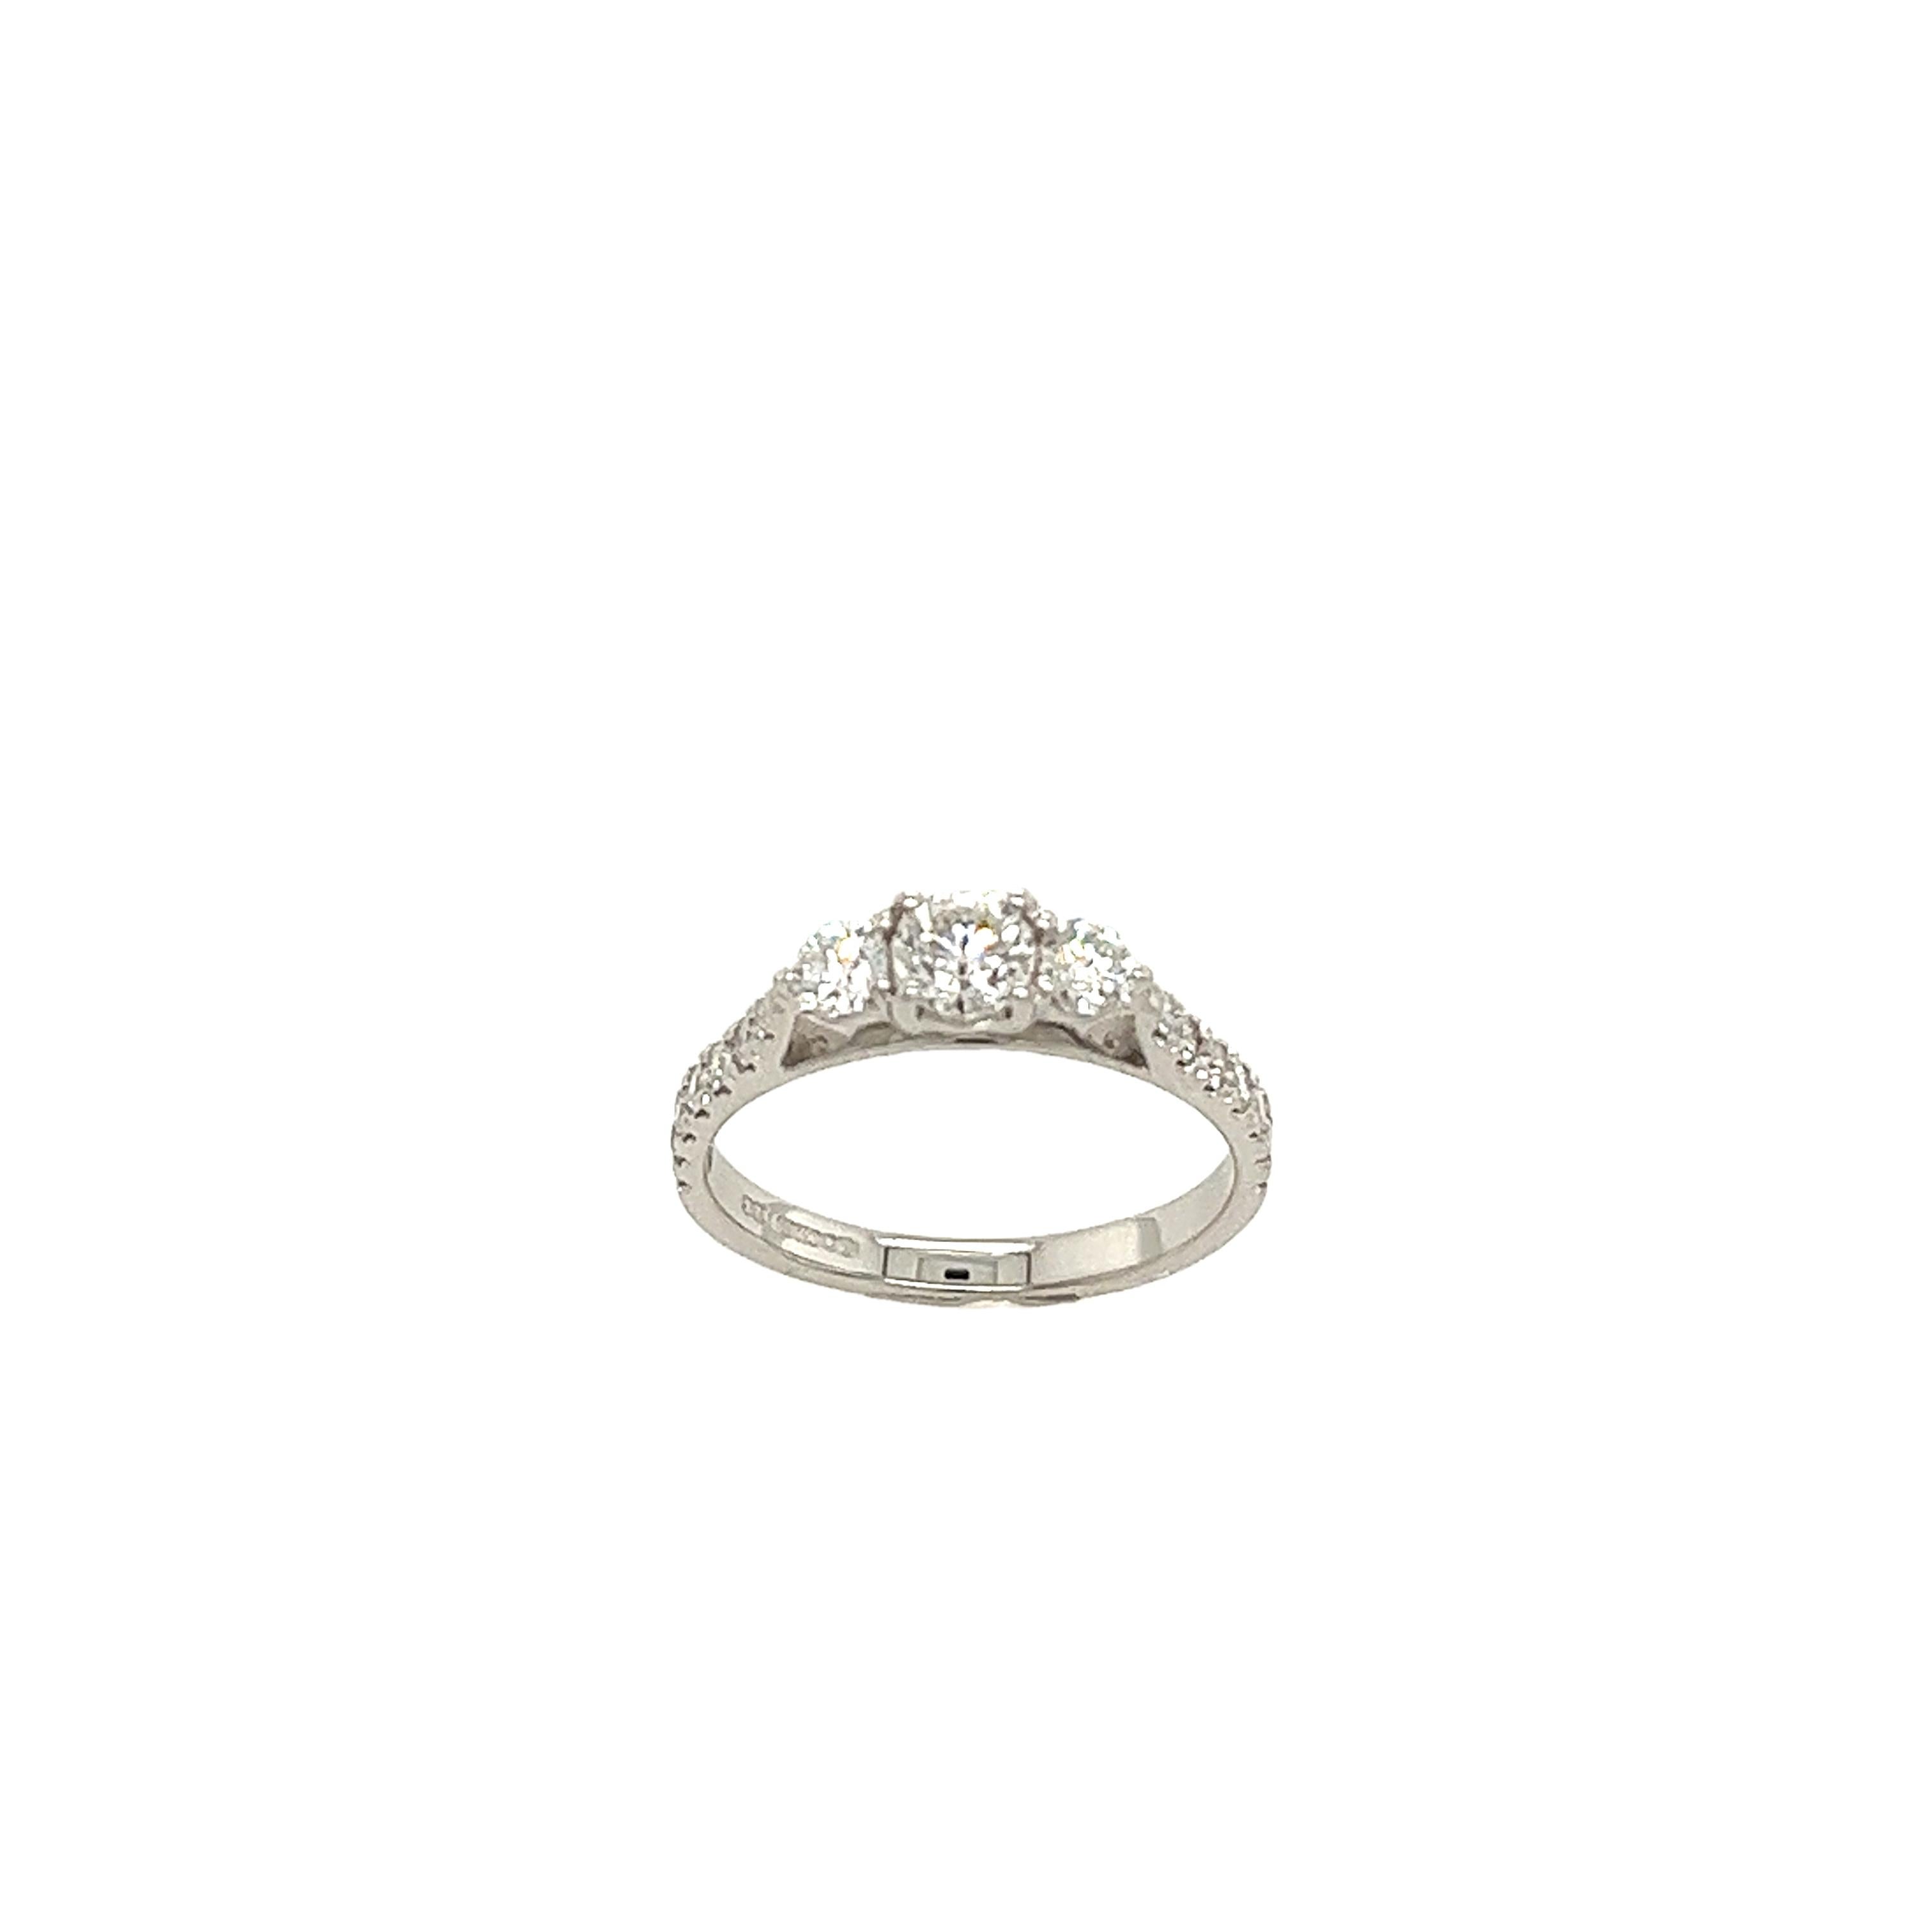 Classic 18ct white gold 3 stone round diamond ring set with small round diamonds on shoulders, 
with 0.70ct round brilliant cut diamonds in total.
A timeless symbol of everlasting love.
Total Diamond Weight: 0.70ct
Diamond Colour: H
Diamond Clarity: